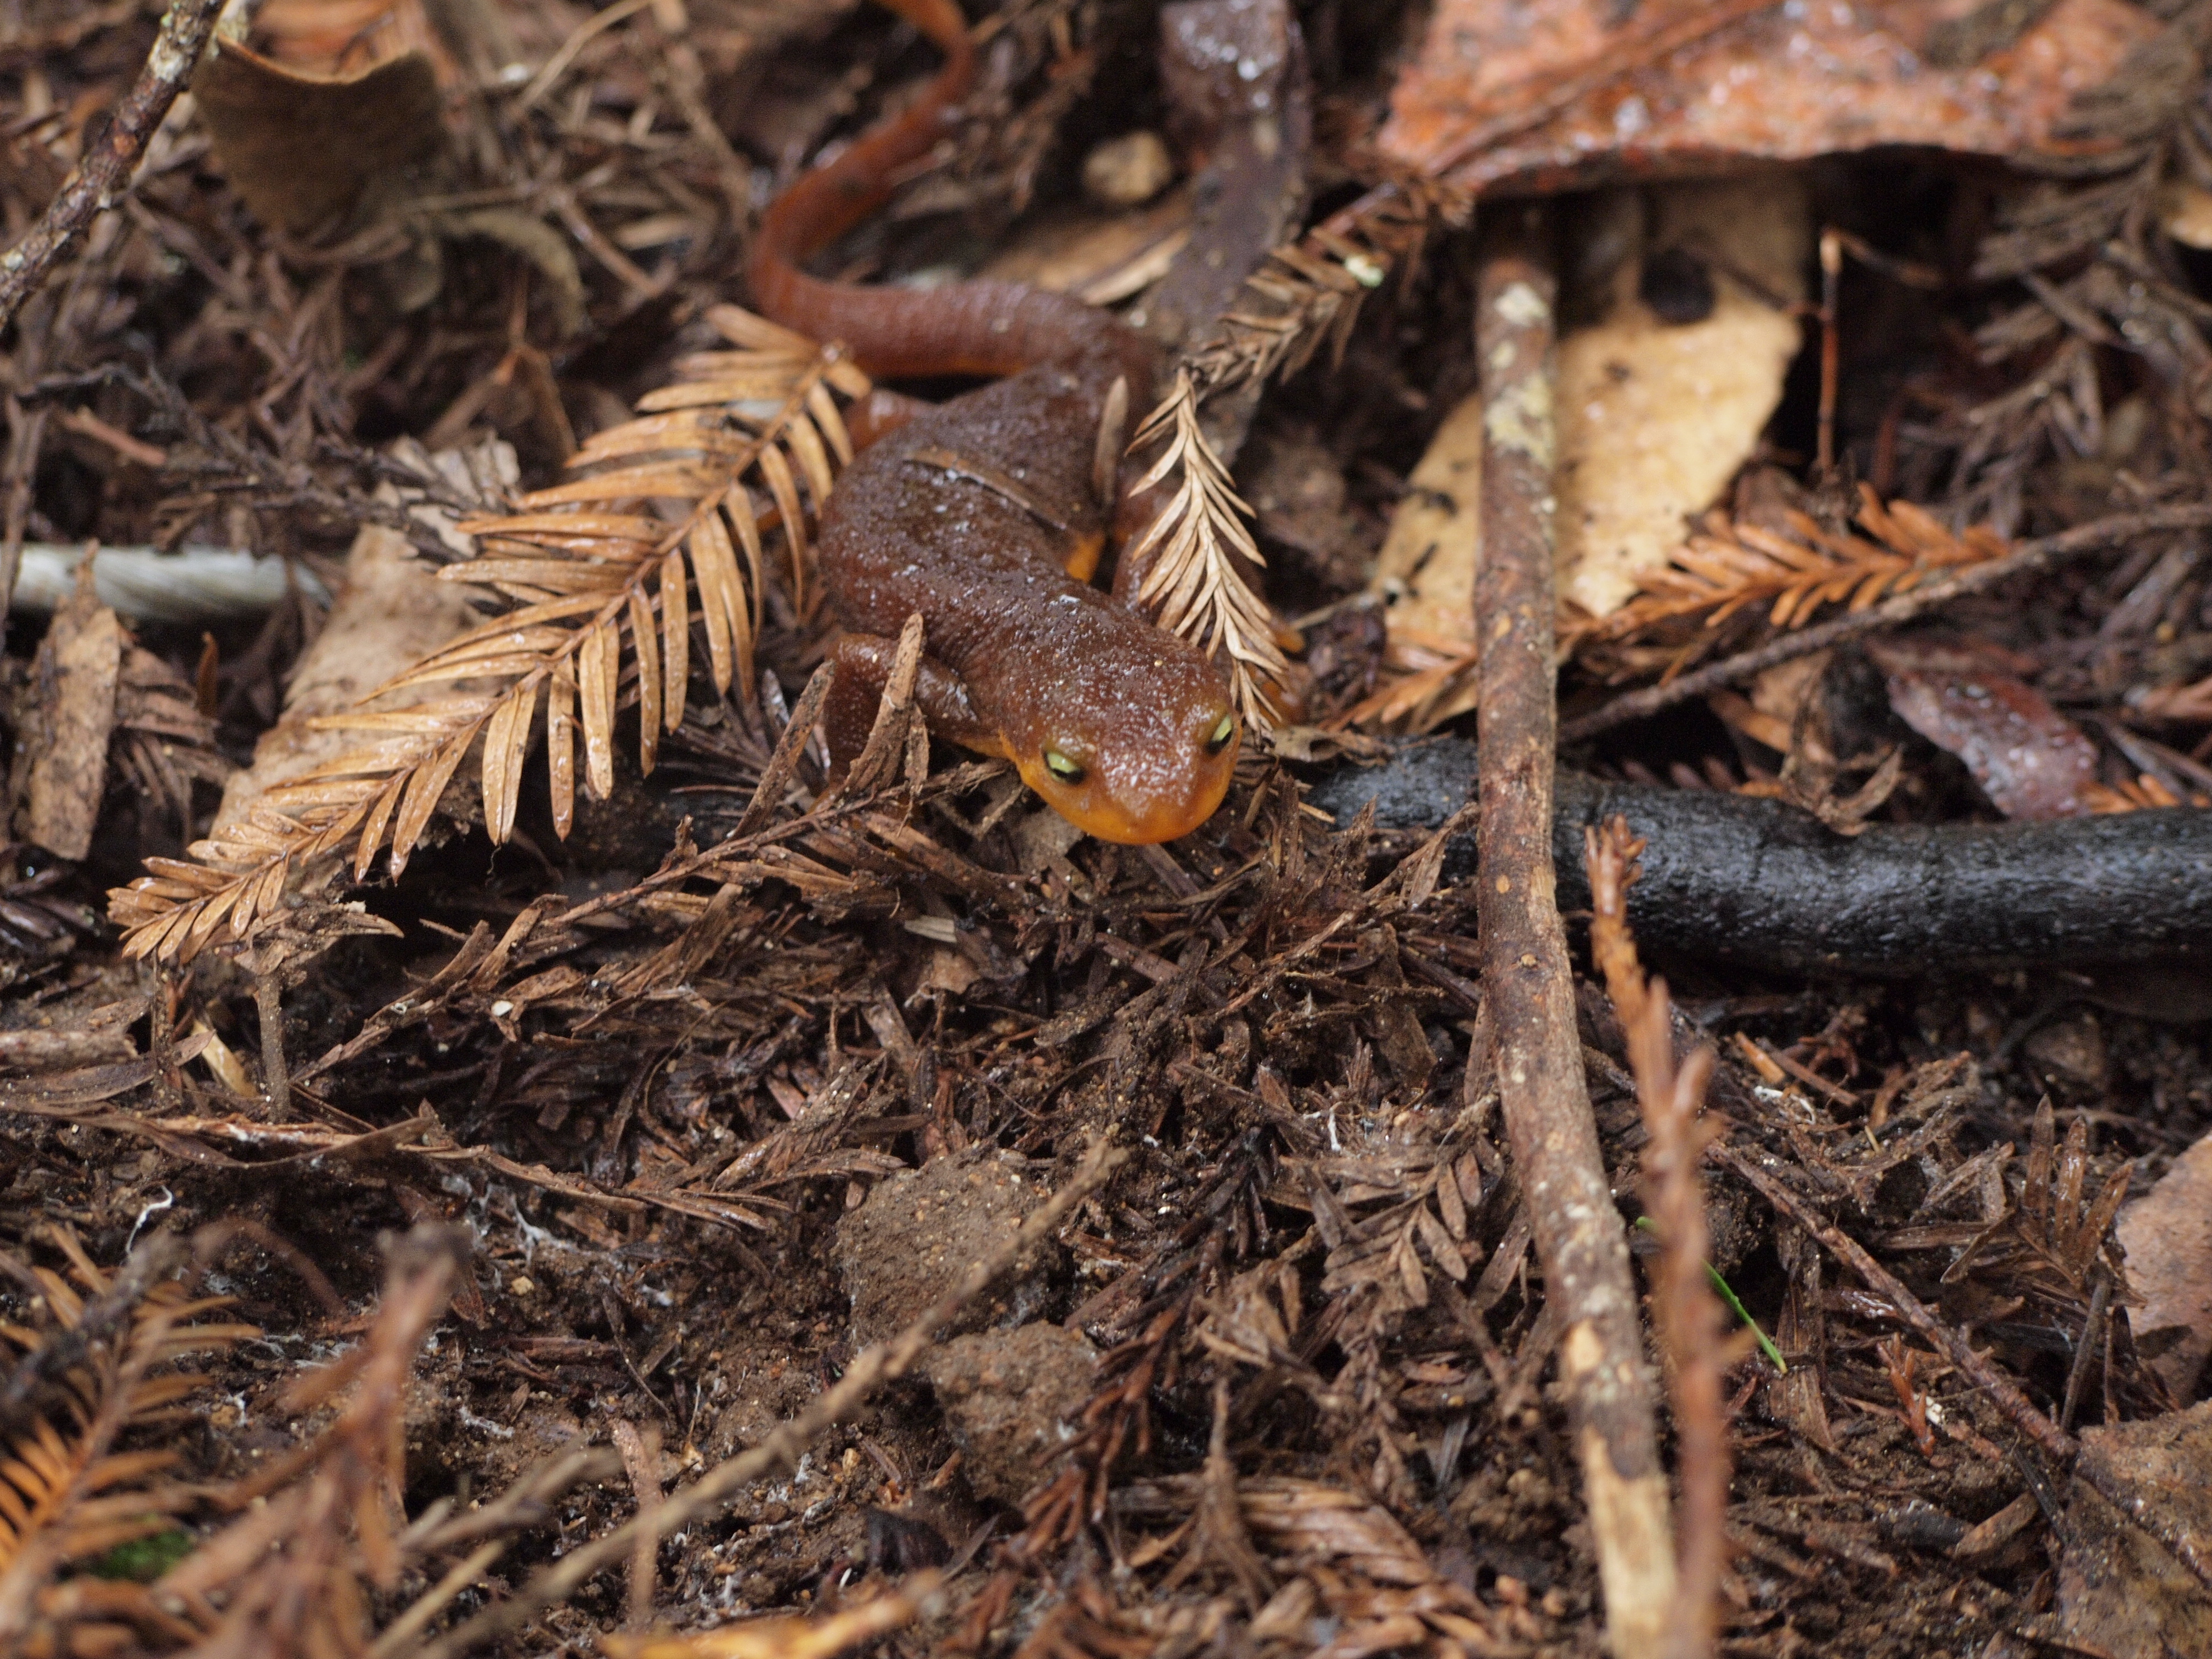 A Rough-skinned Newt, brown with an orange underbelly, walking on a bed of pine needles and twigs. Used with permission from Meredith Thomsen